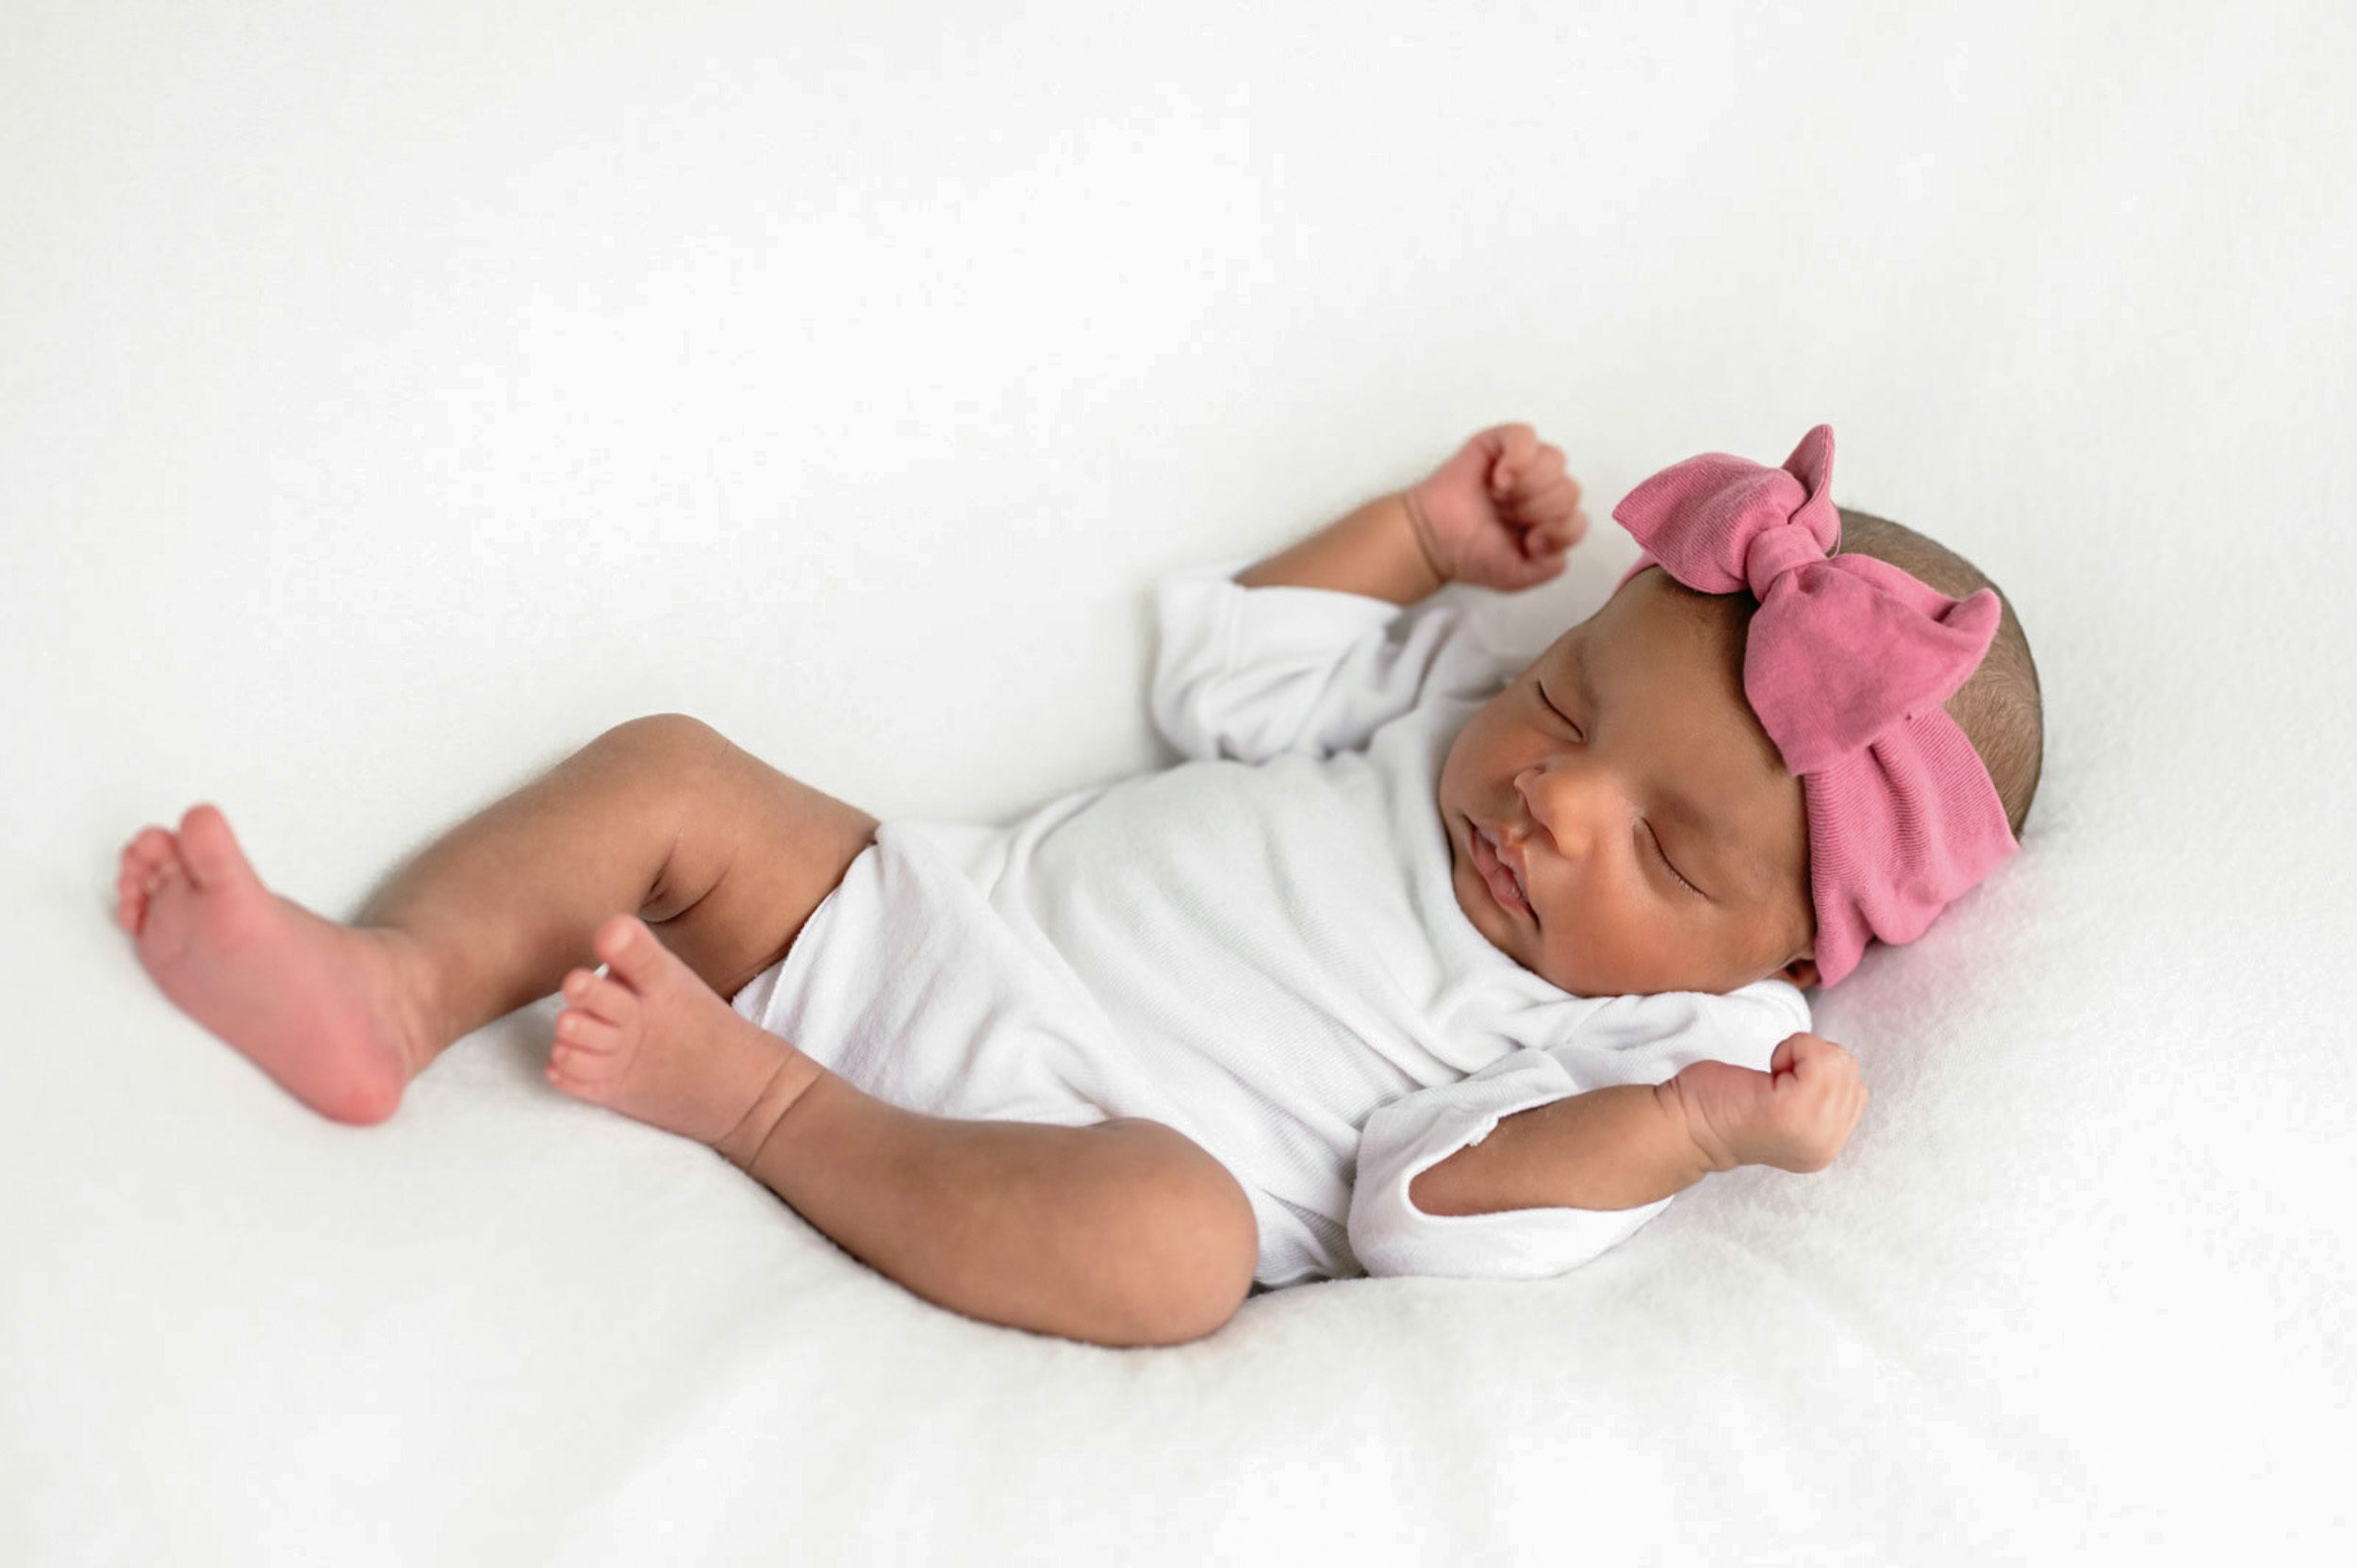 a baby girl wearing a white onesie and pink handband laying on a white backdrop during a newborn photoshoot